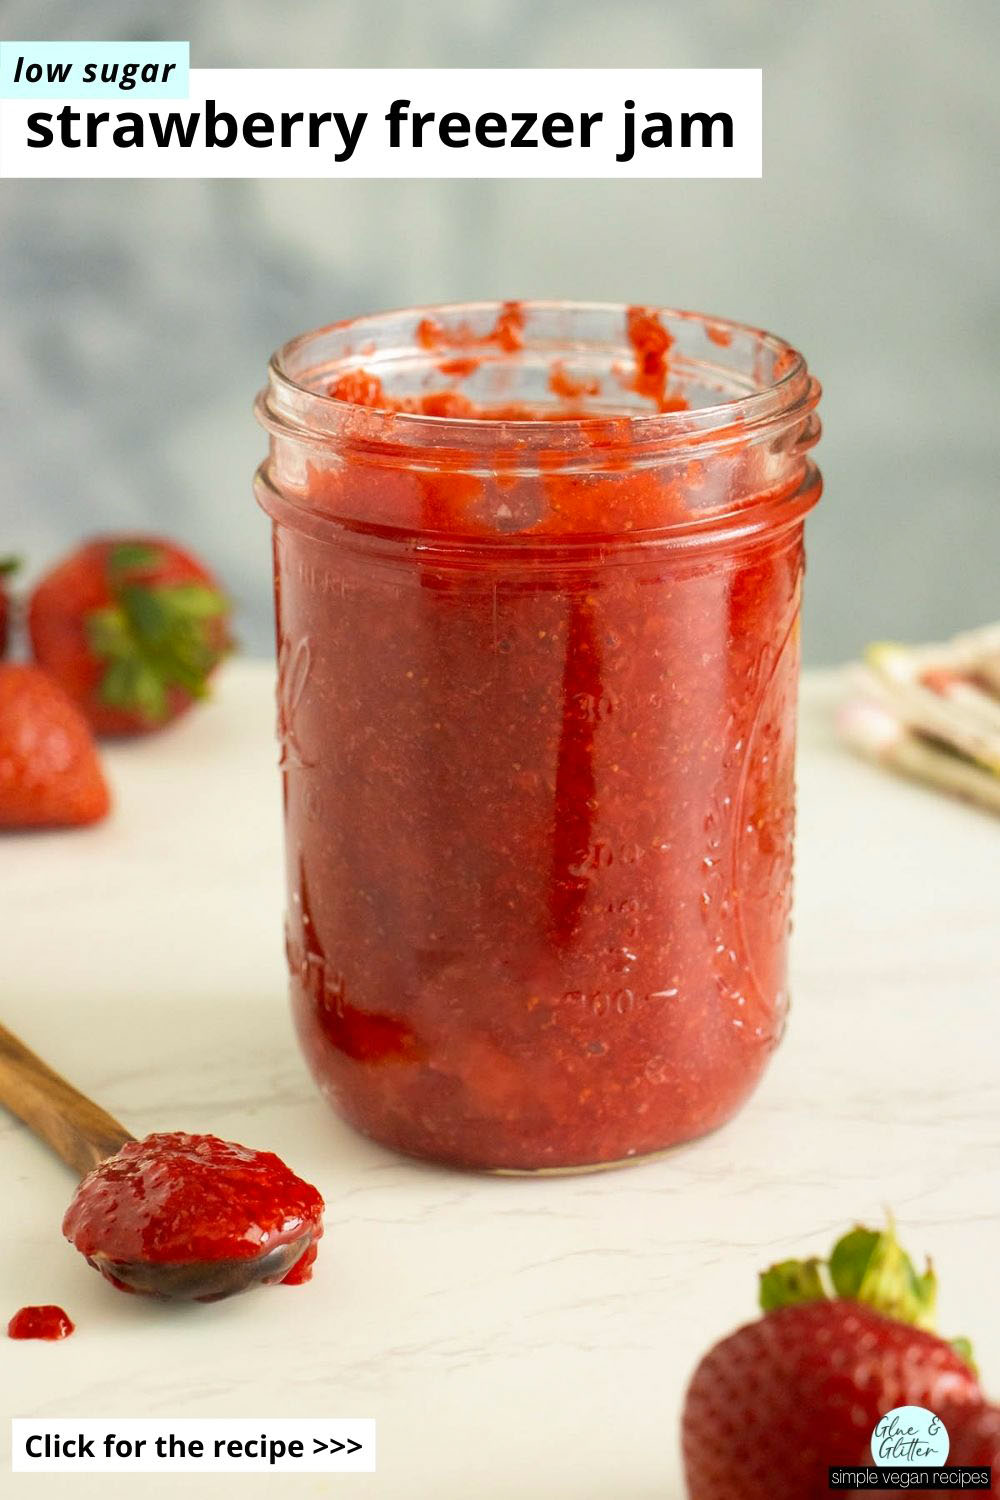 jar of low sugar strawberry freezer jam on a white table surrounded by strawberries and a spoon with the jam in it, text overlay